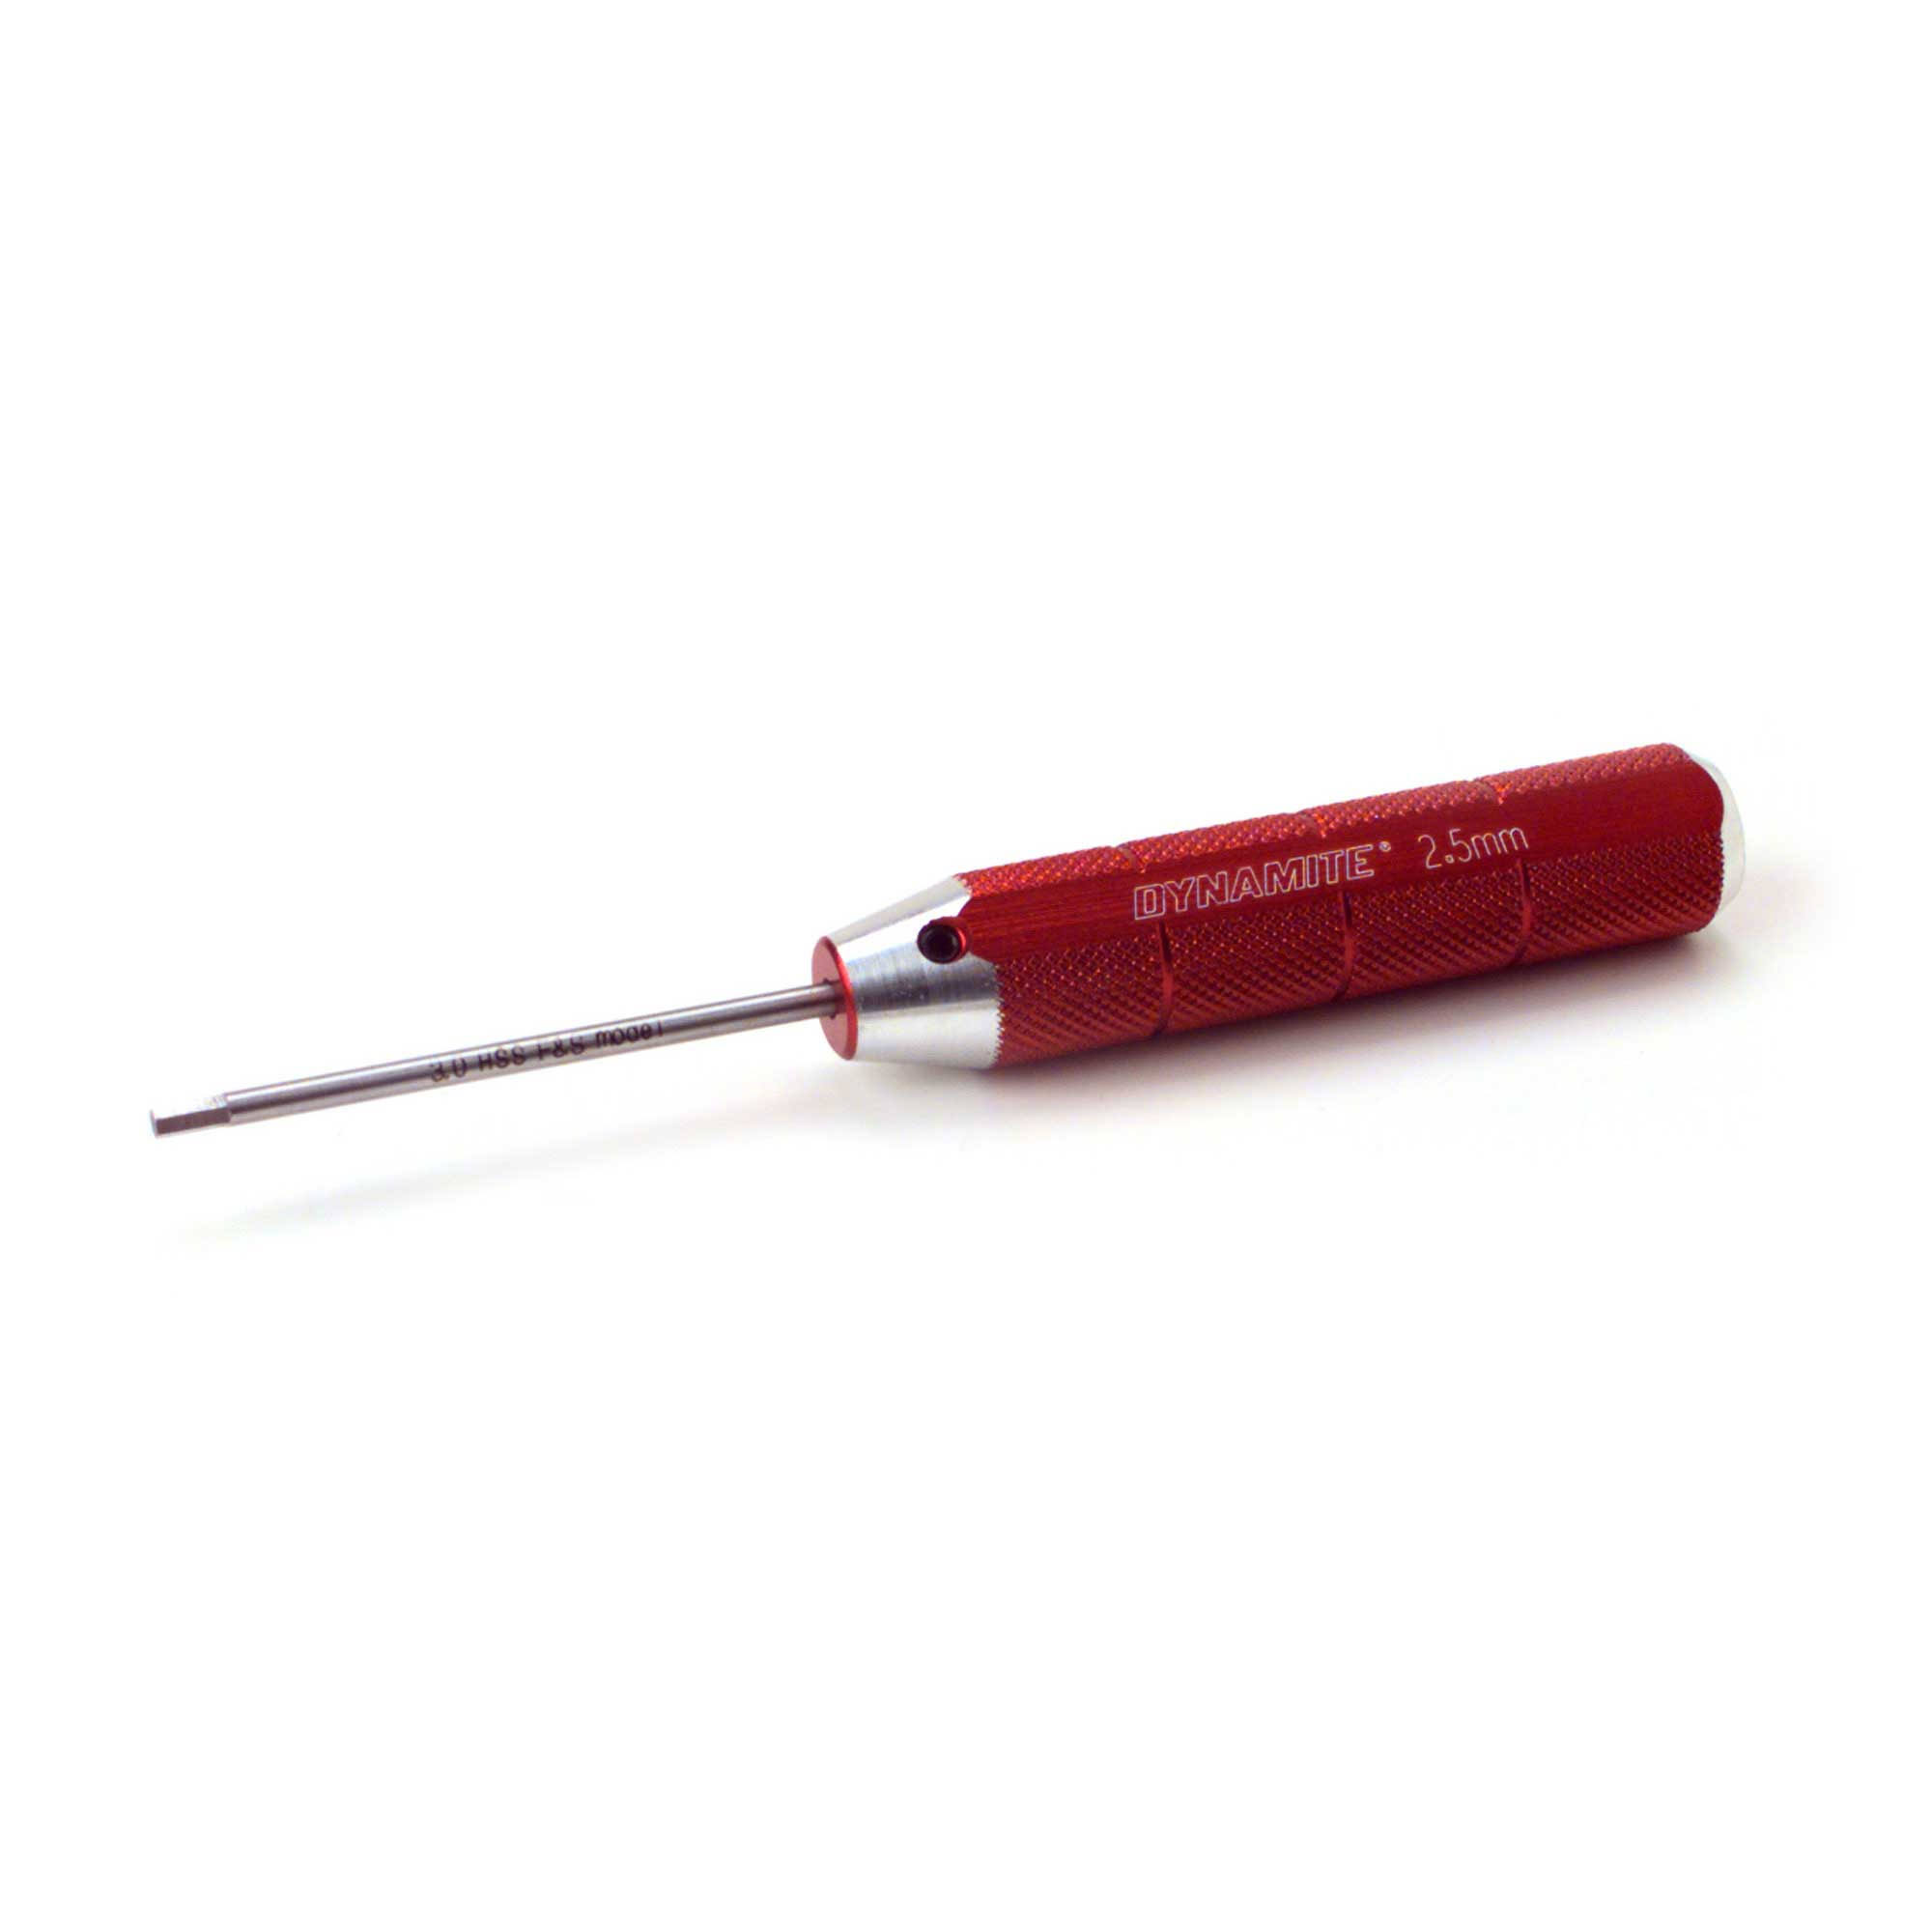 Dynamite Machined Hex Driver - Red, 2.5mm